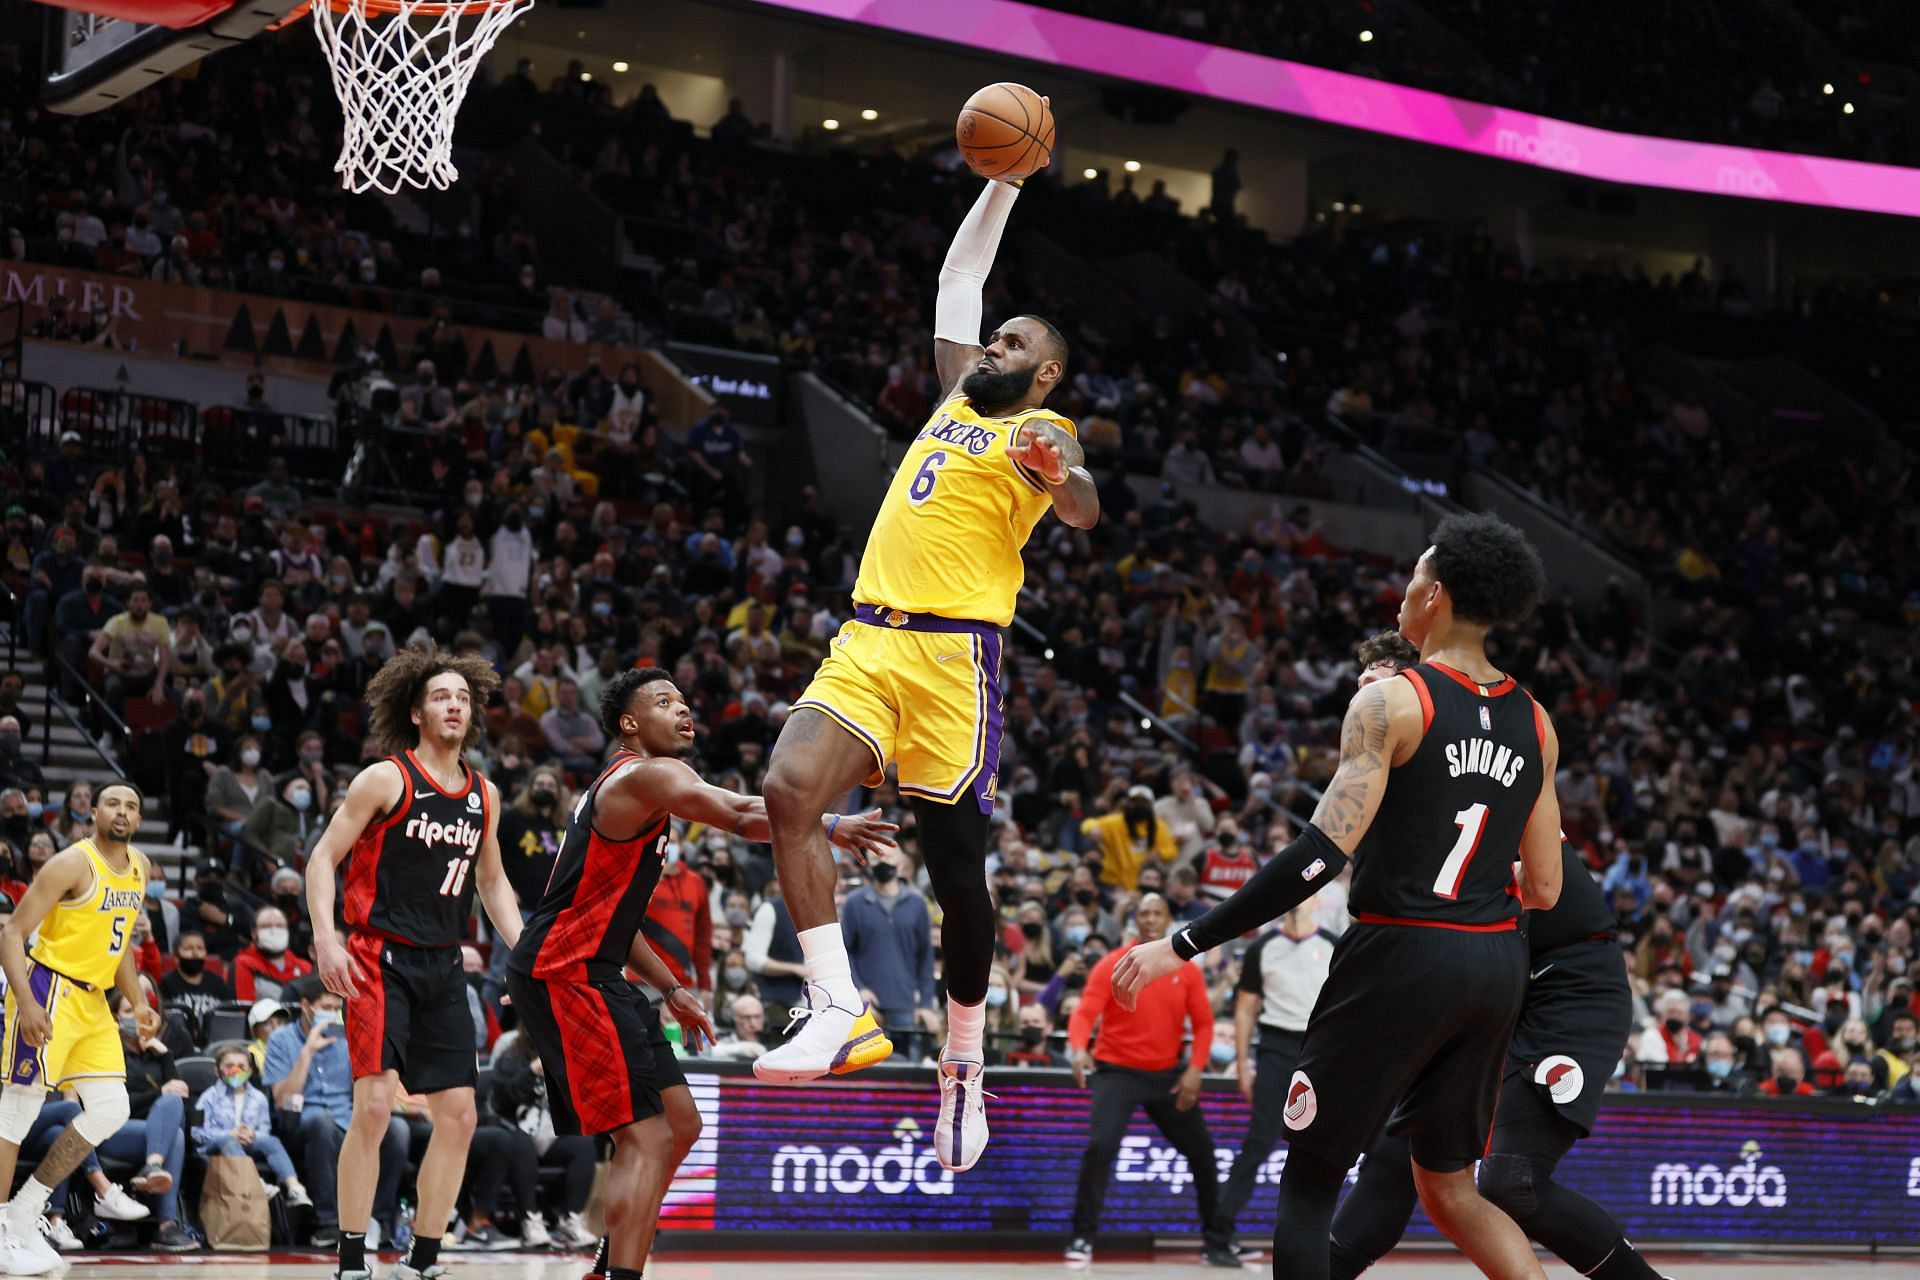 LeBron James #6 of the Los Angeles Lakers dunks against the Portland Trail Blazers